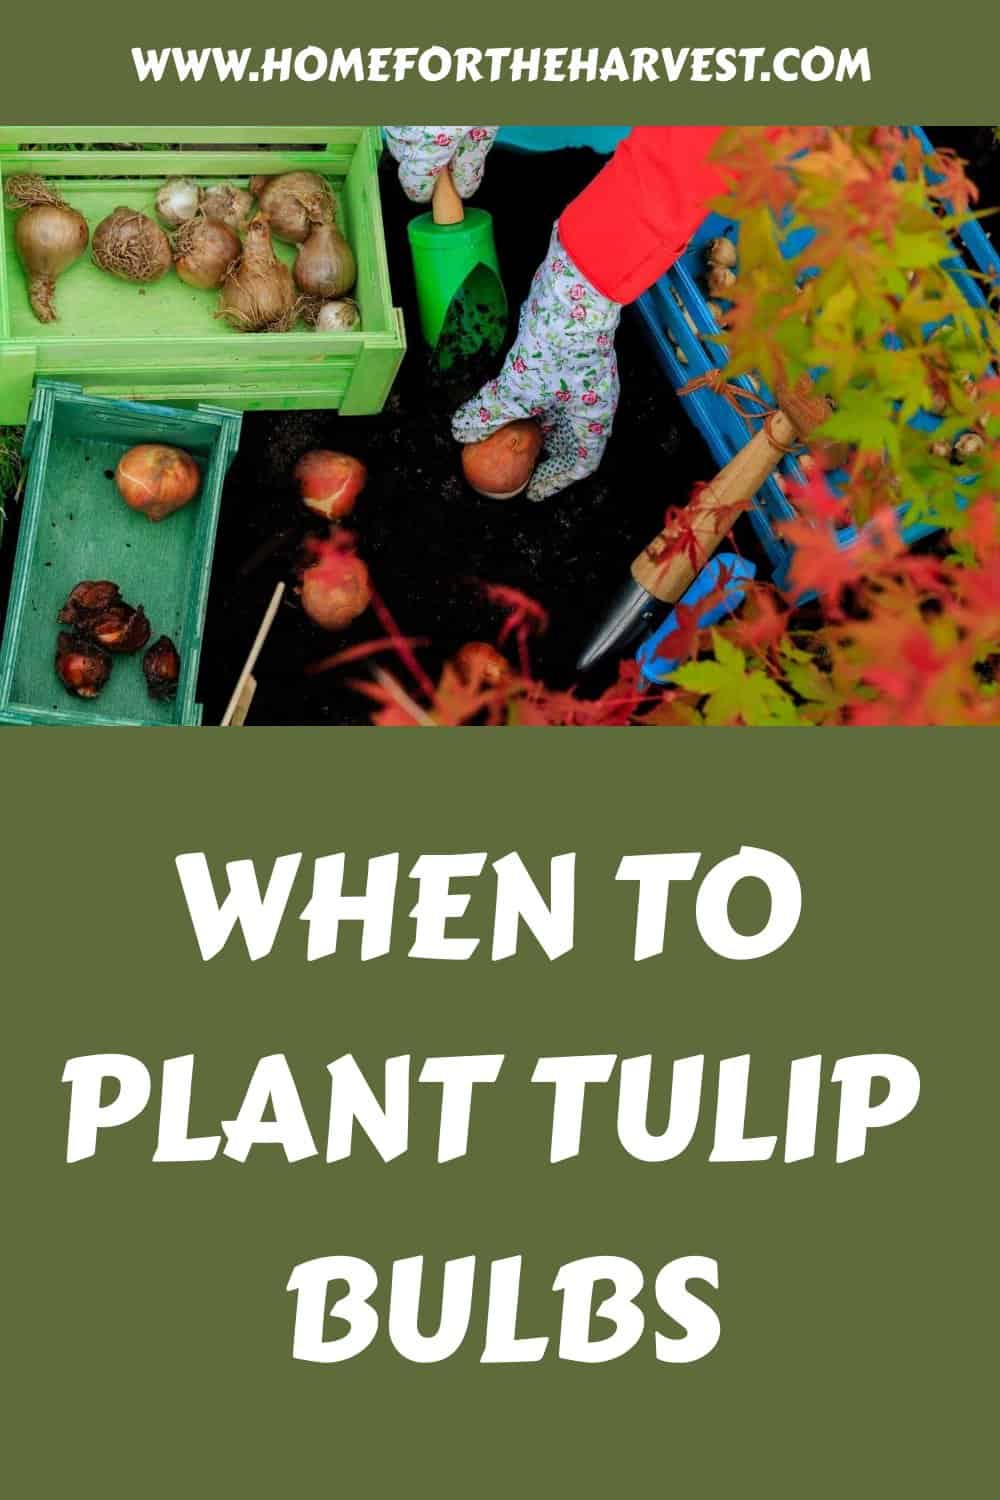 When to plant tulip bulbs generated pin 28157